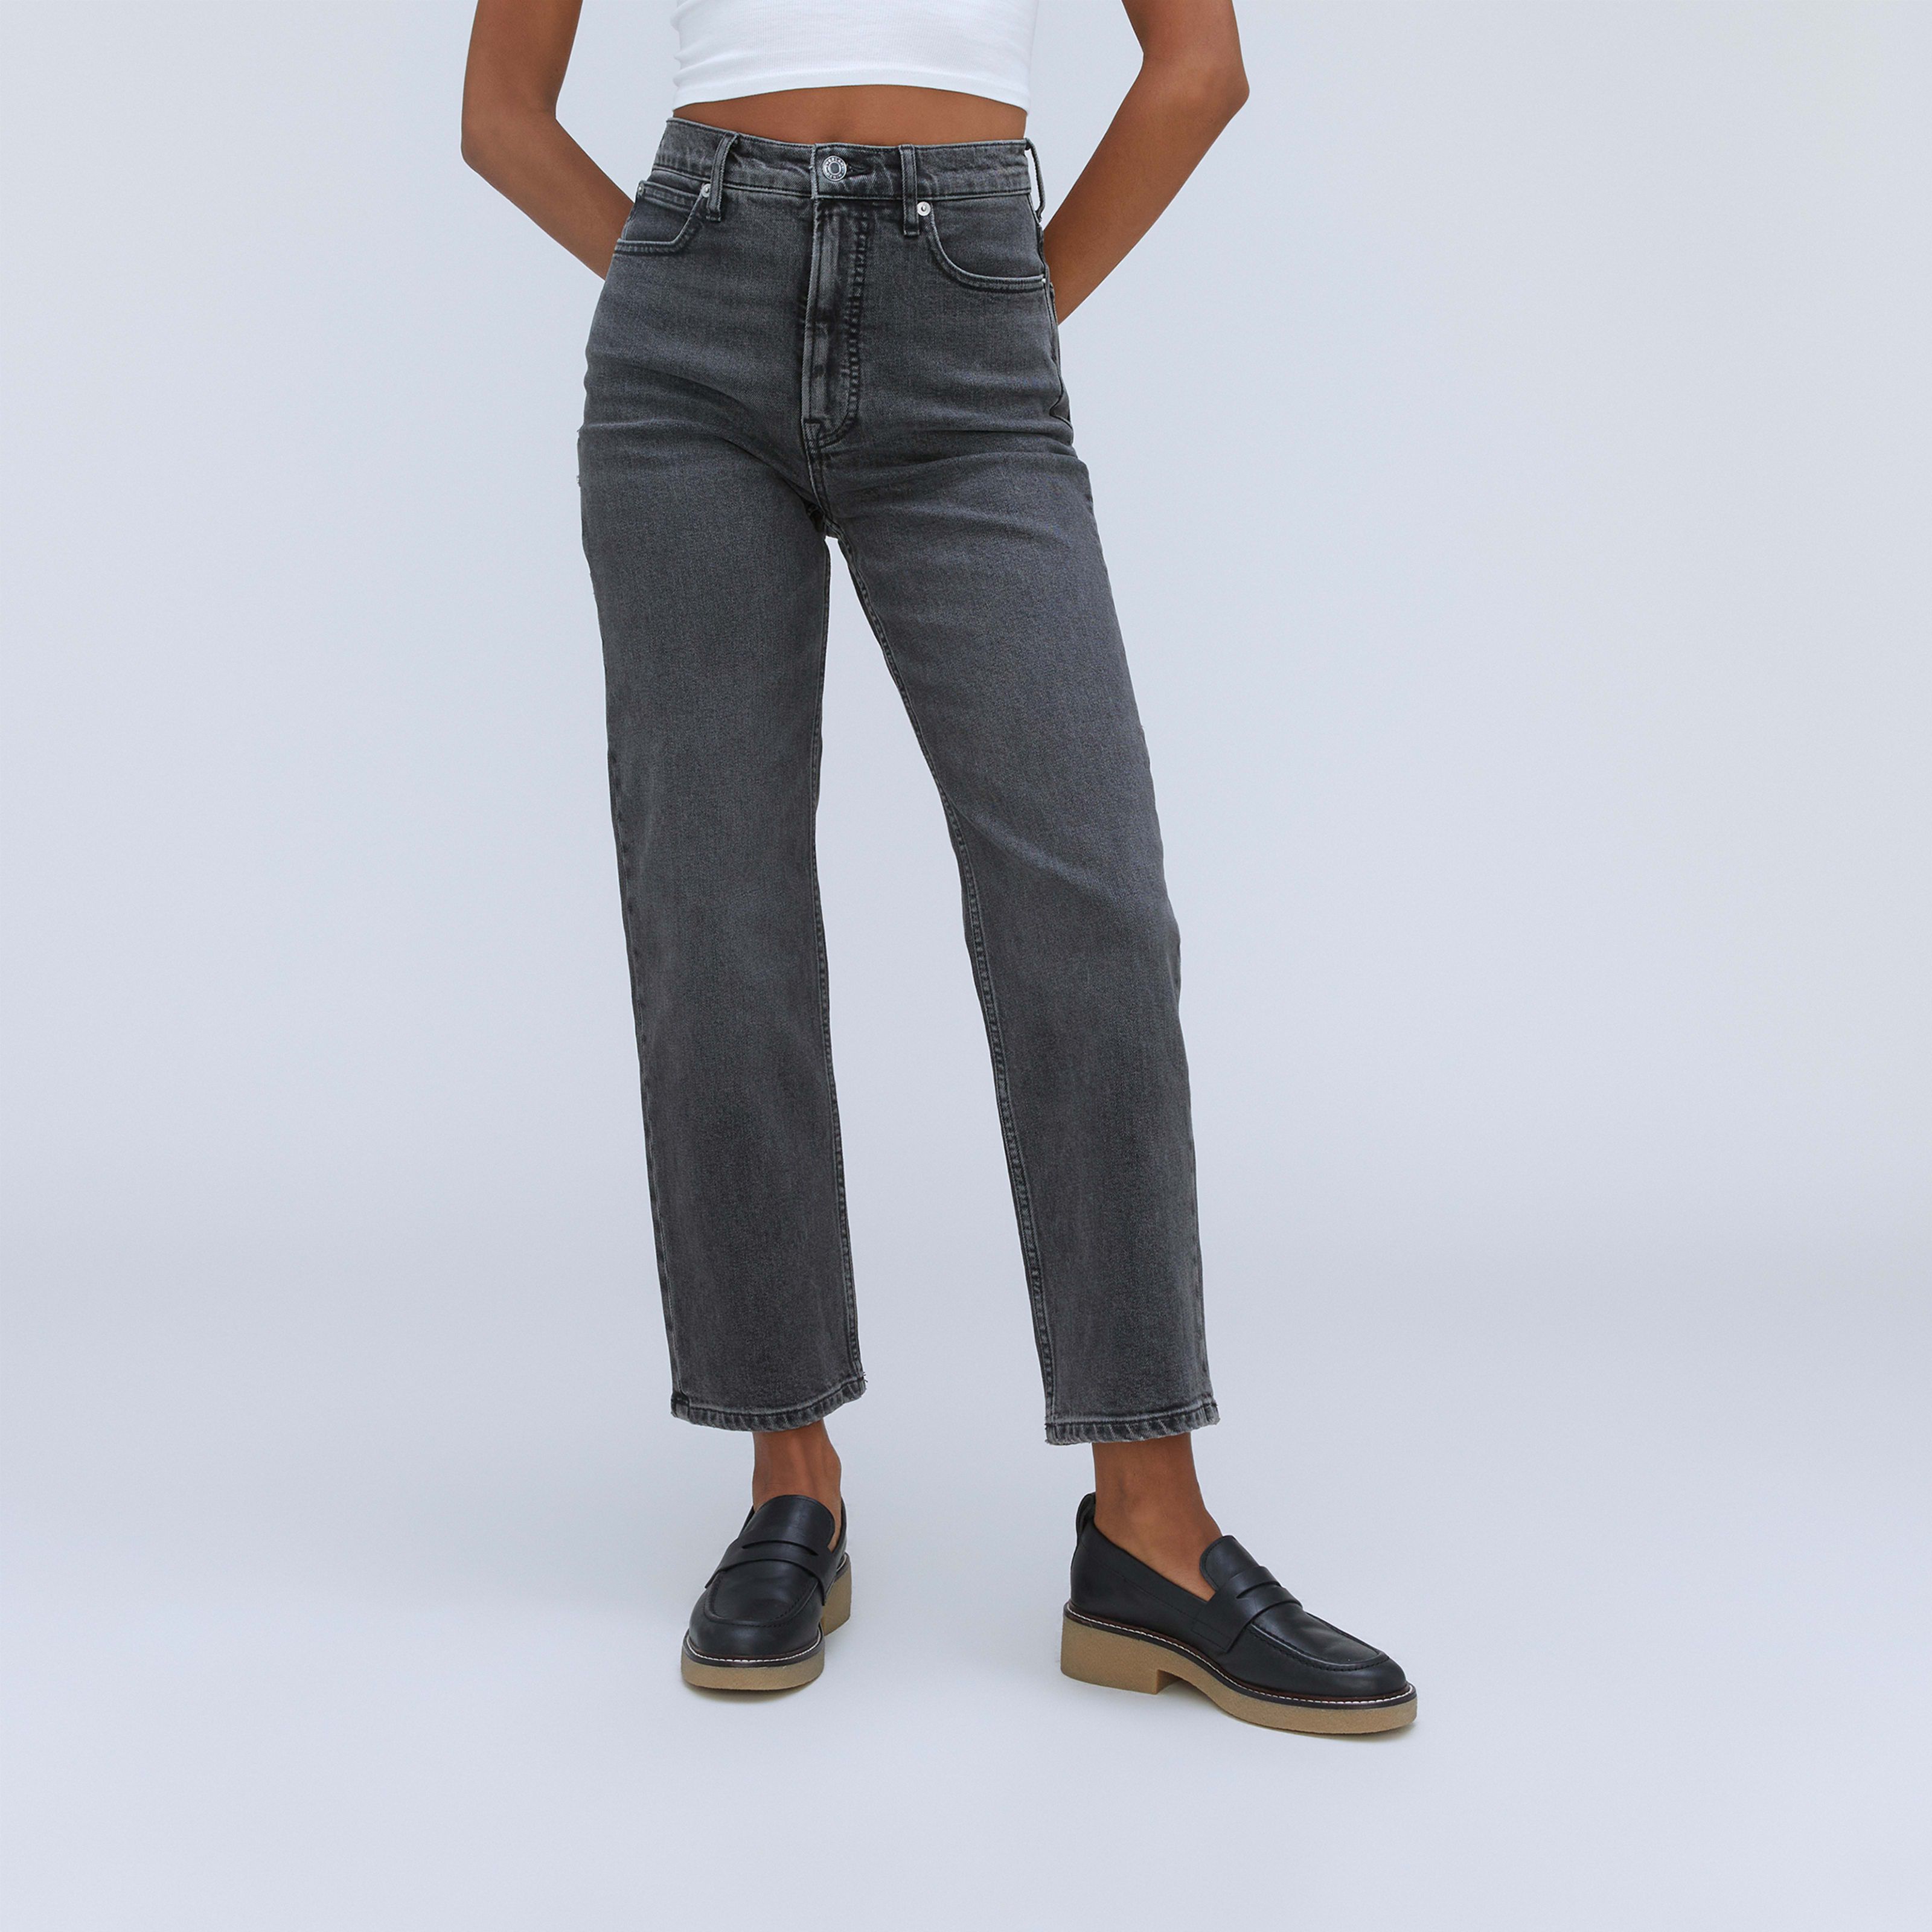 Women's Way-HighÂ® Jean by Everlane in Washed Black, Size 23 | Everlane